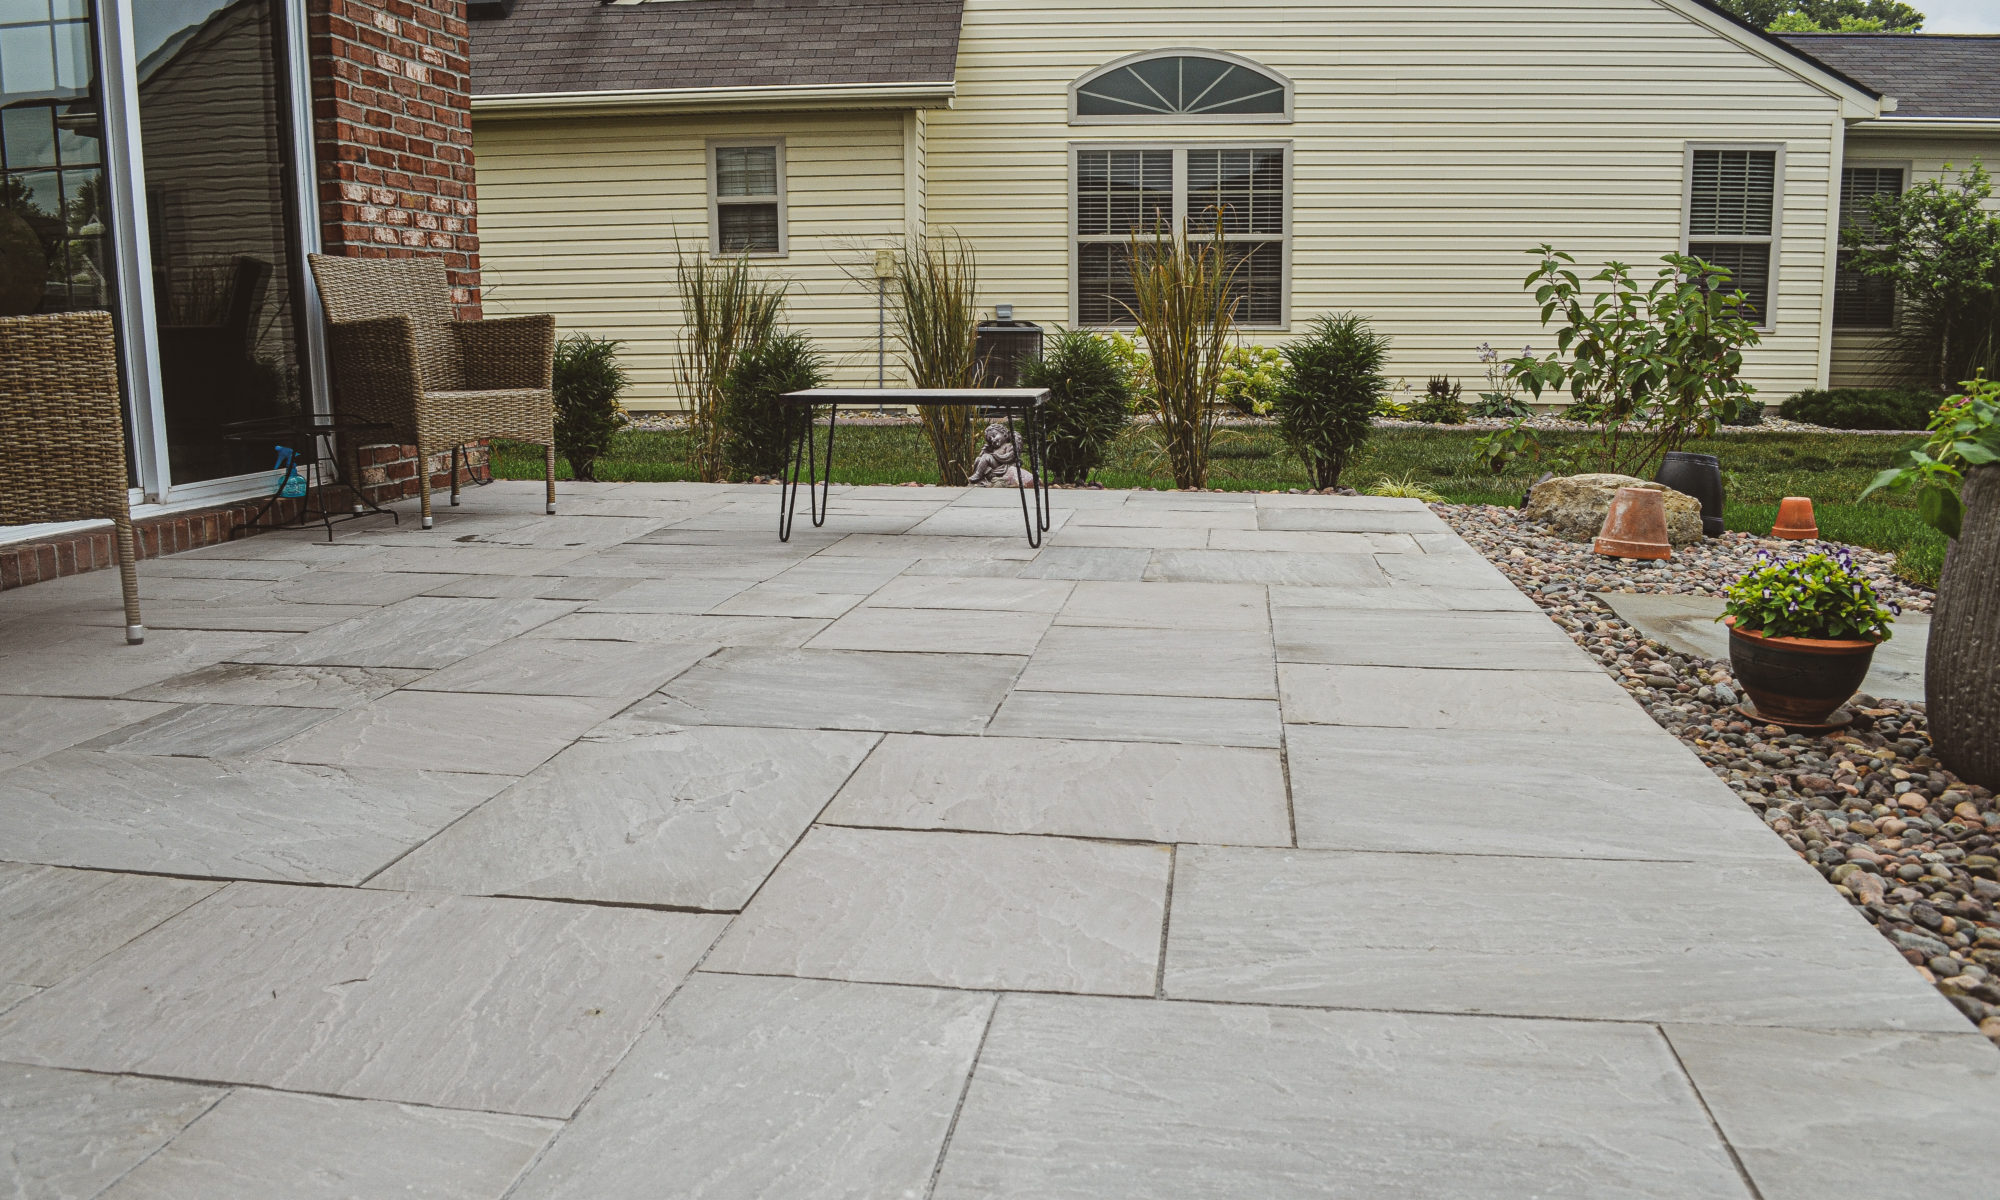 Precision Outdoors Bluestone Paver Patio Custom Landscaping River Rock Indianapolis Indiana beautiful landscaping